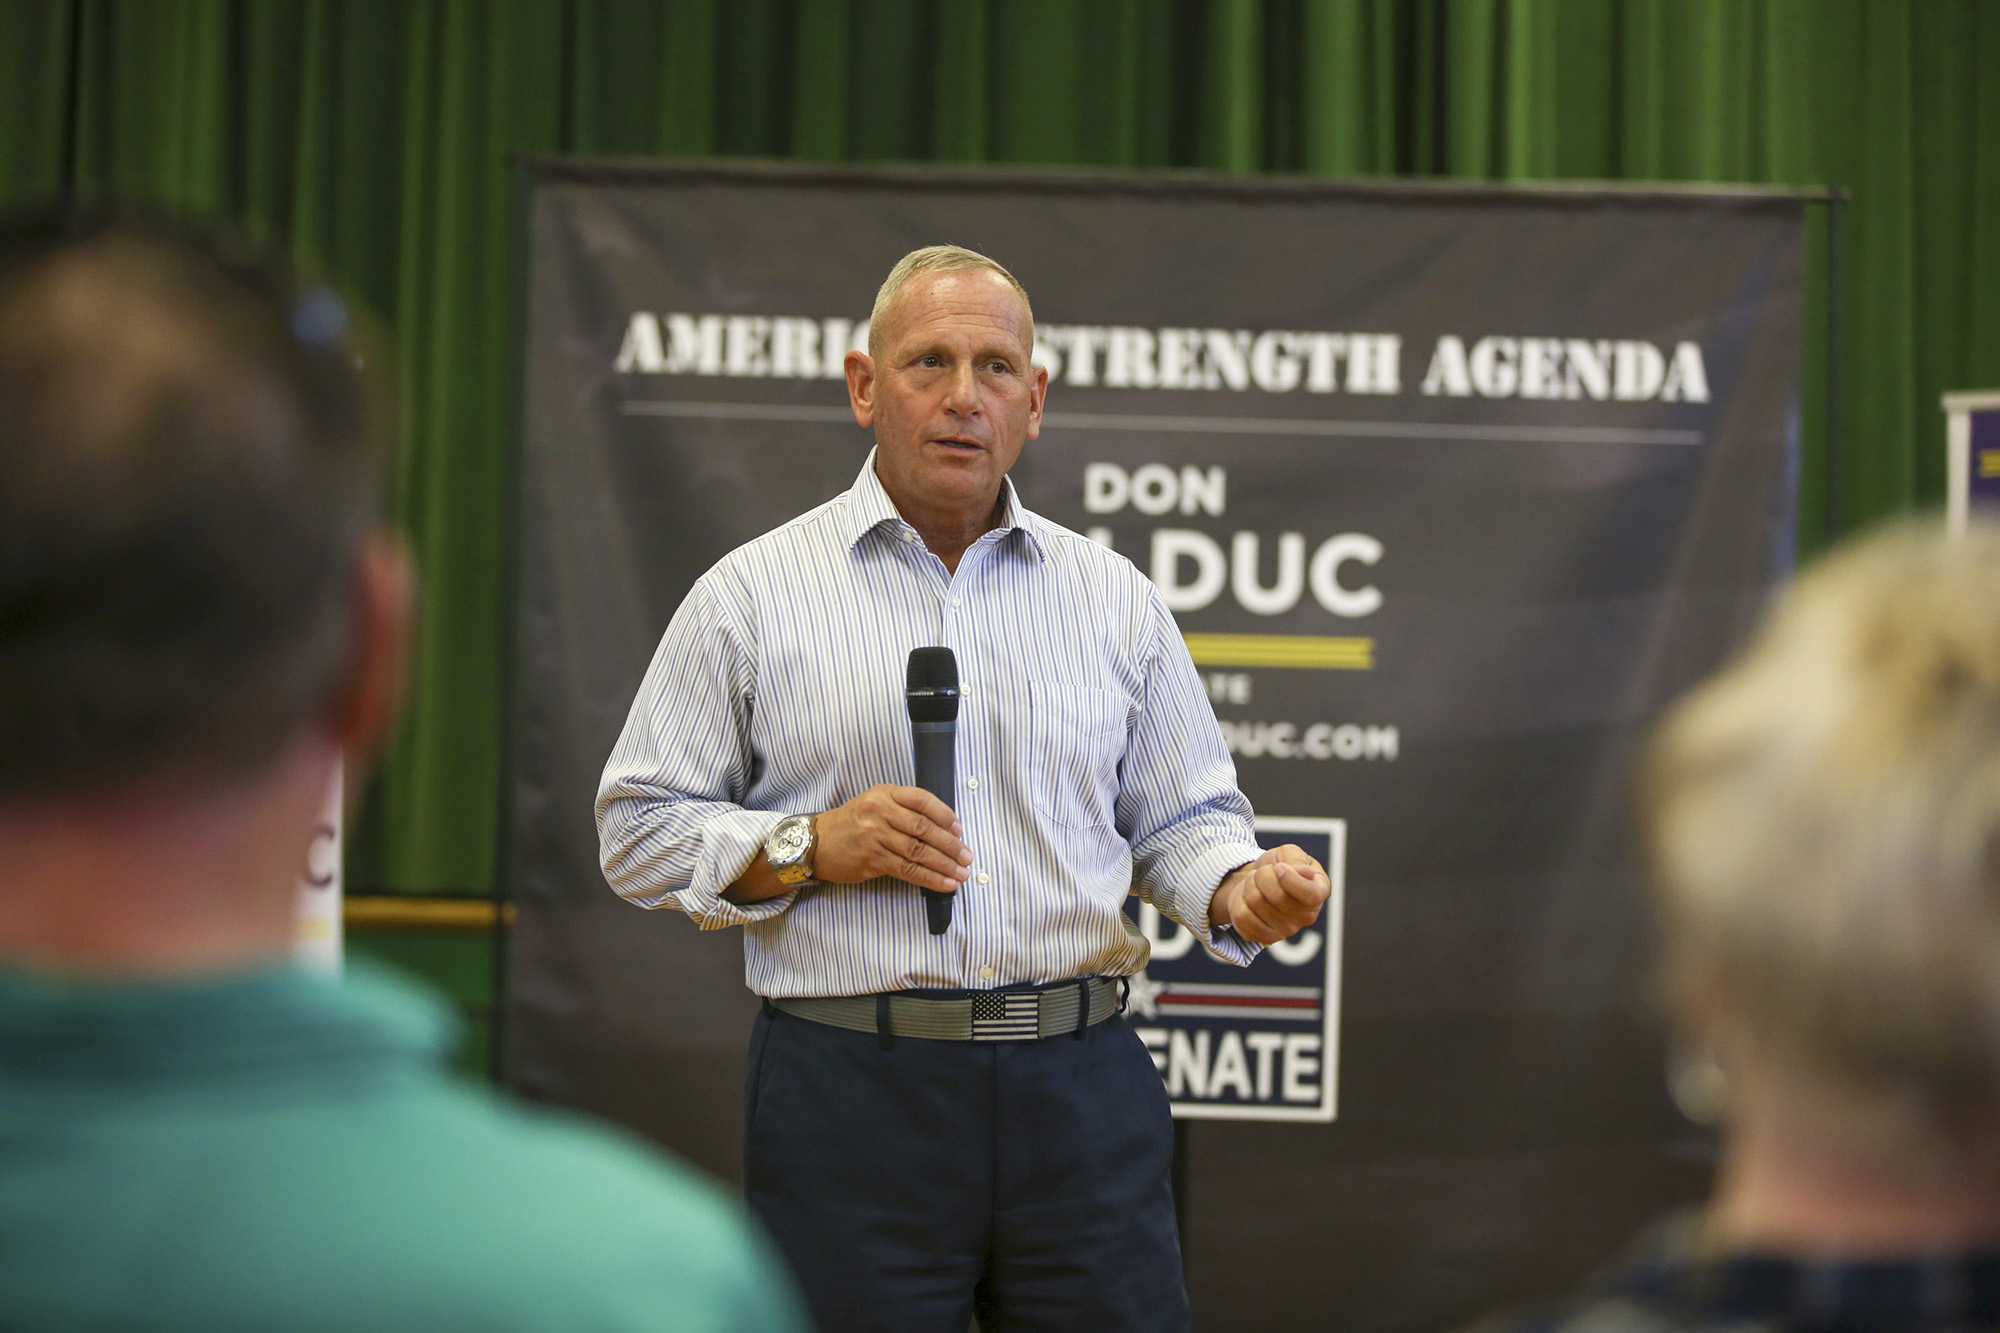 New Hampshire Republican U.S. Senate candidate Don Bolduc speaks during a campaign gathering on November 5, in Nashua, 